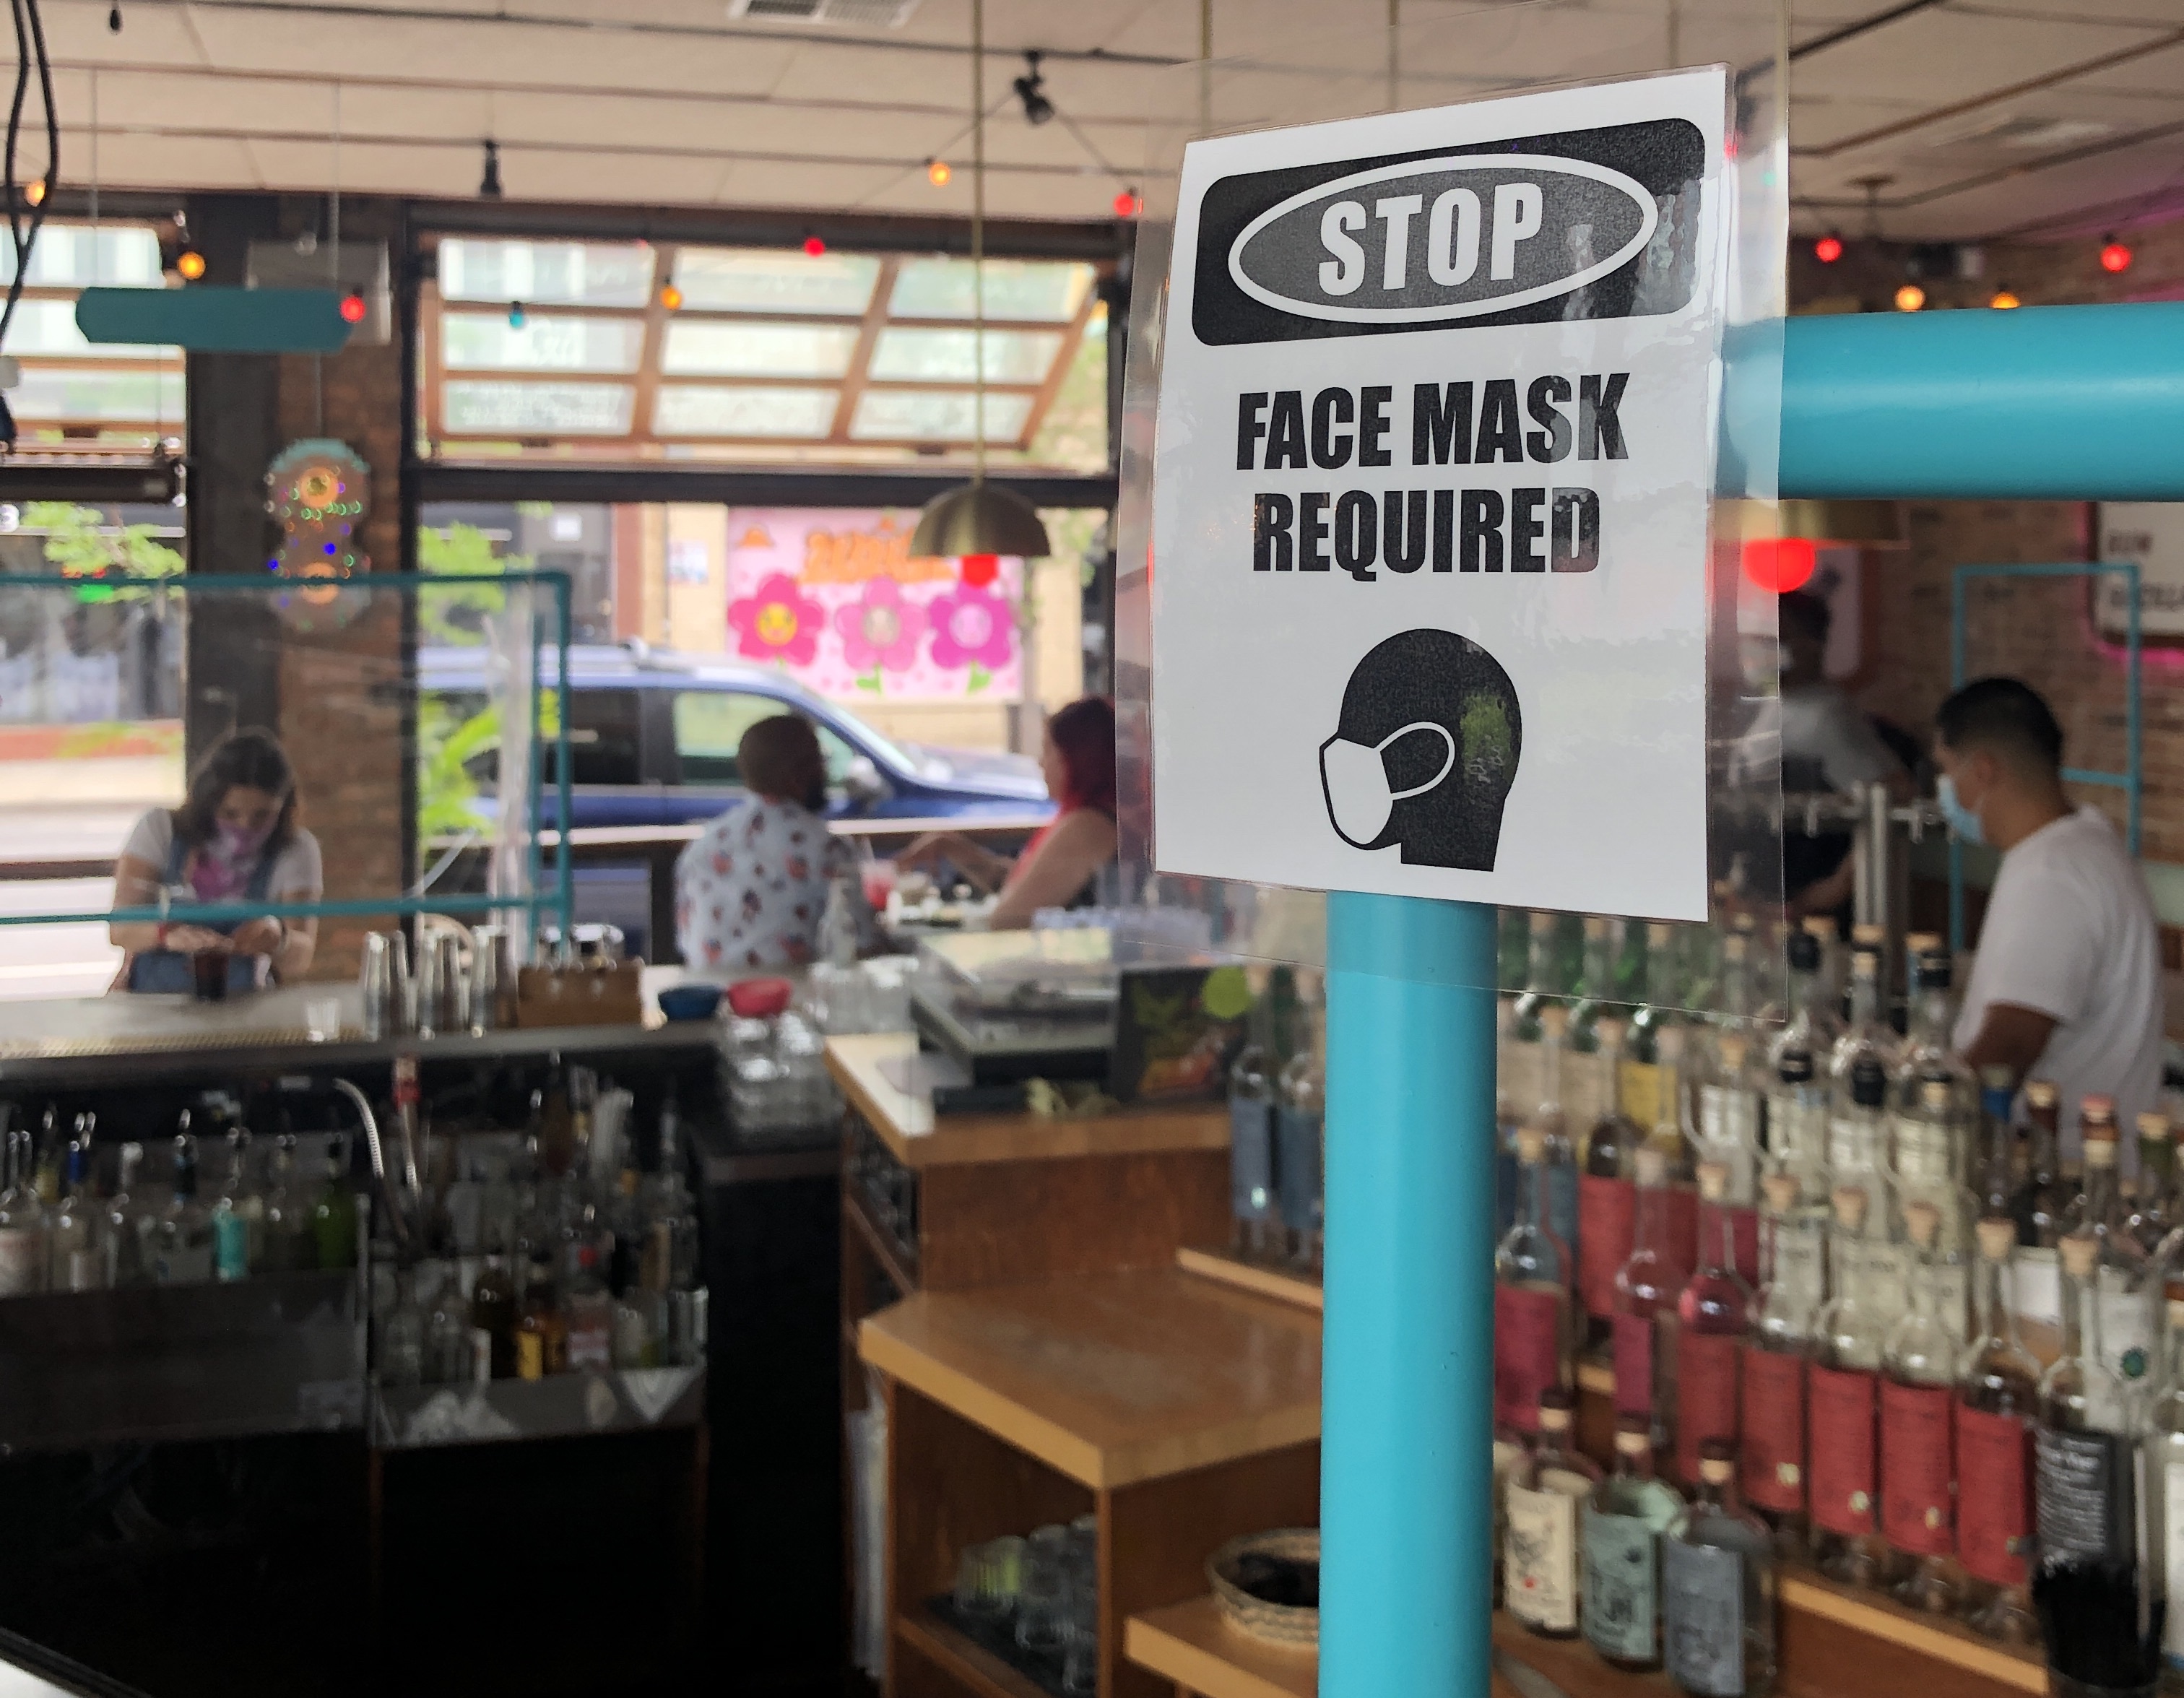 A bar with a “face mask required” sign on its counter.